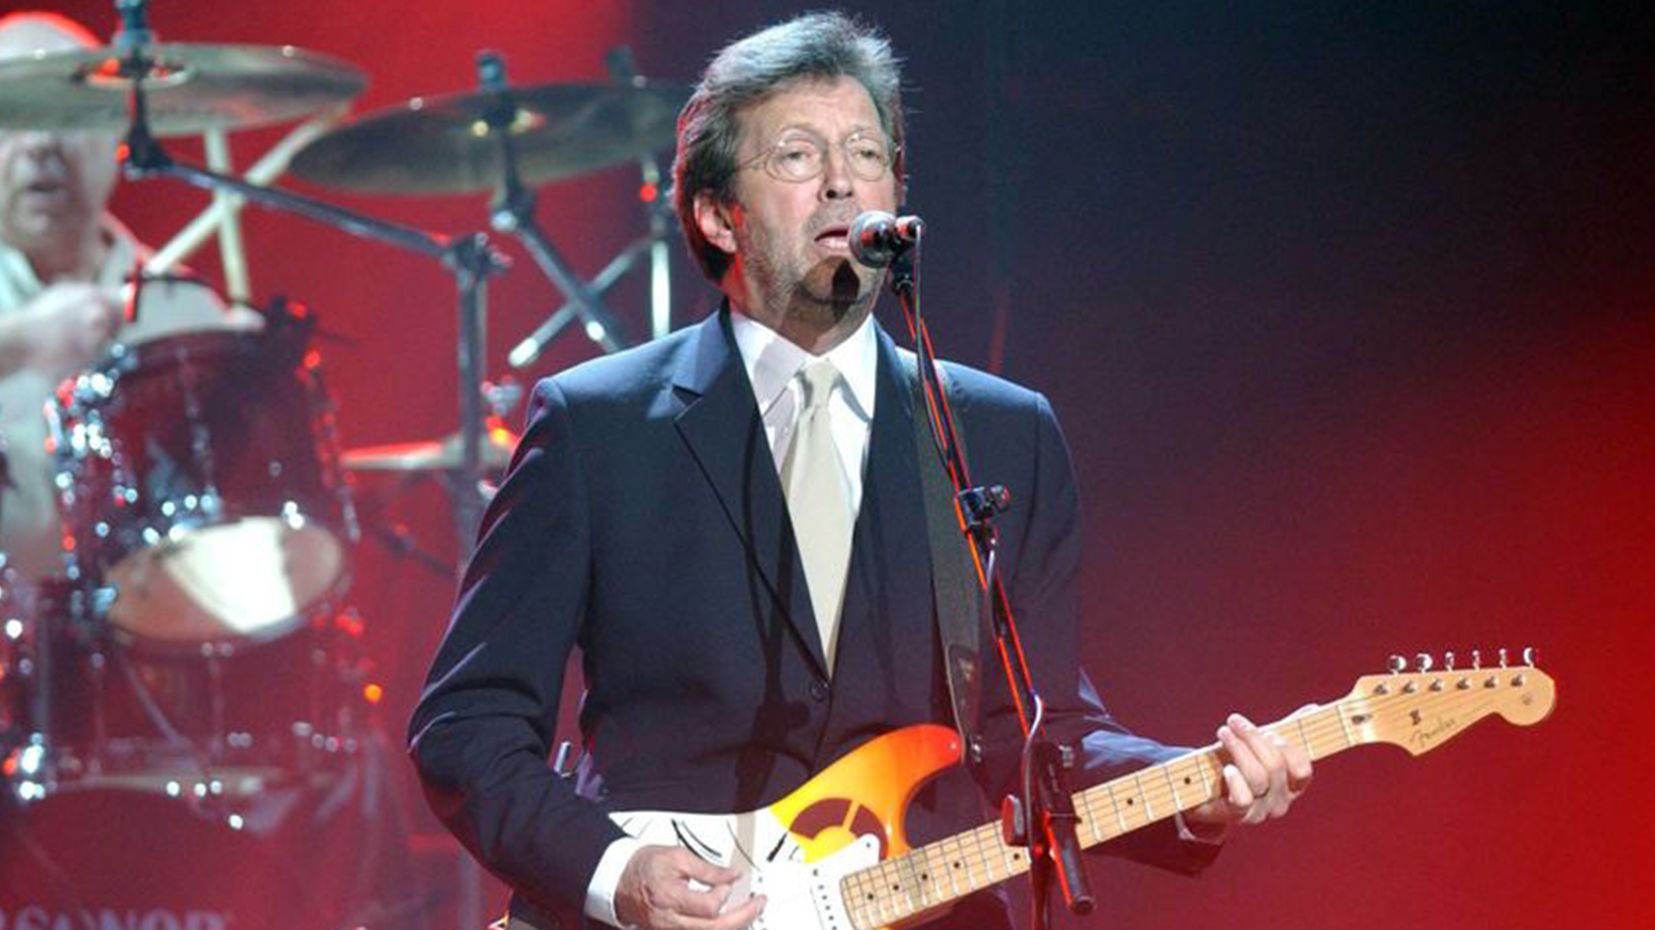 Eric Clapton: The singer's career highlights